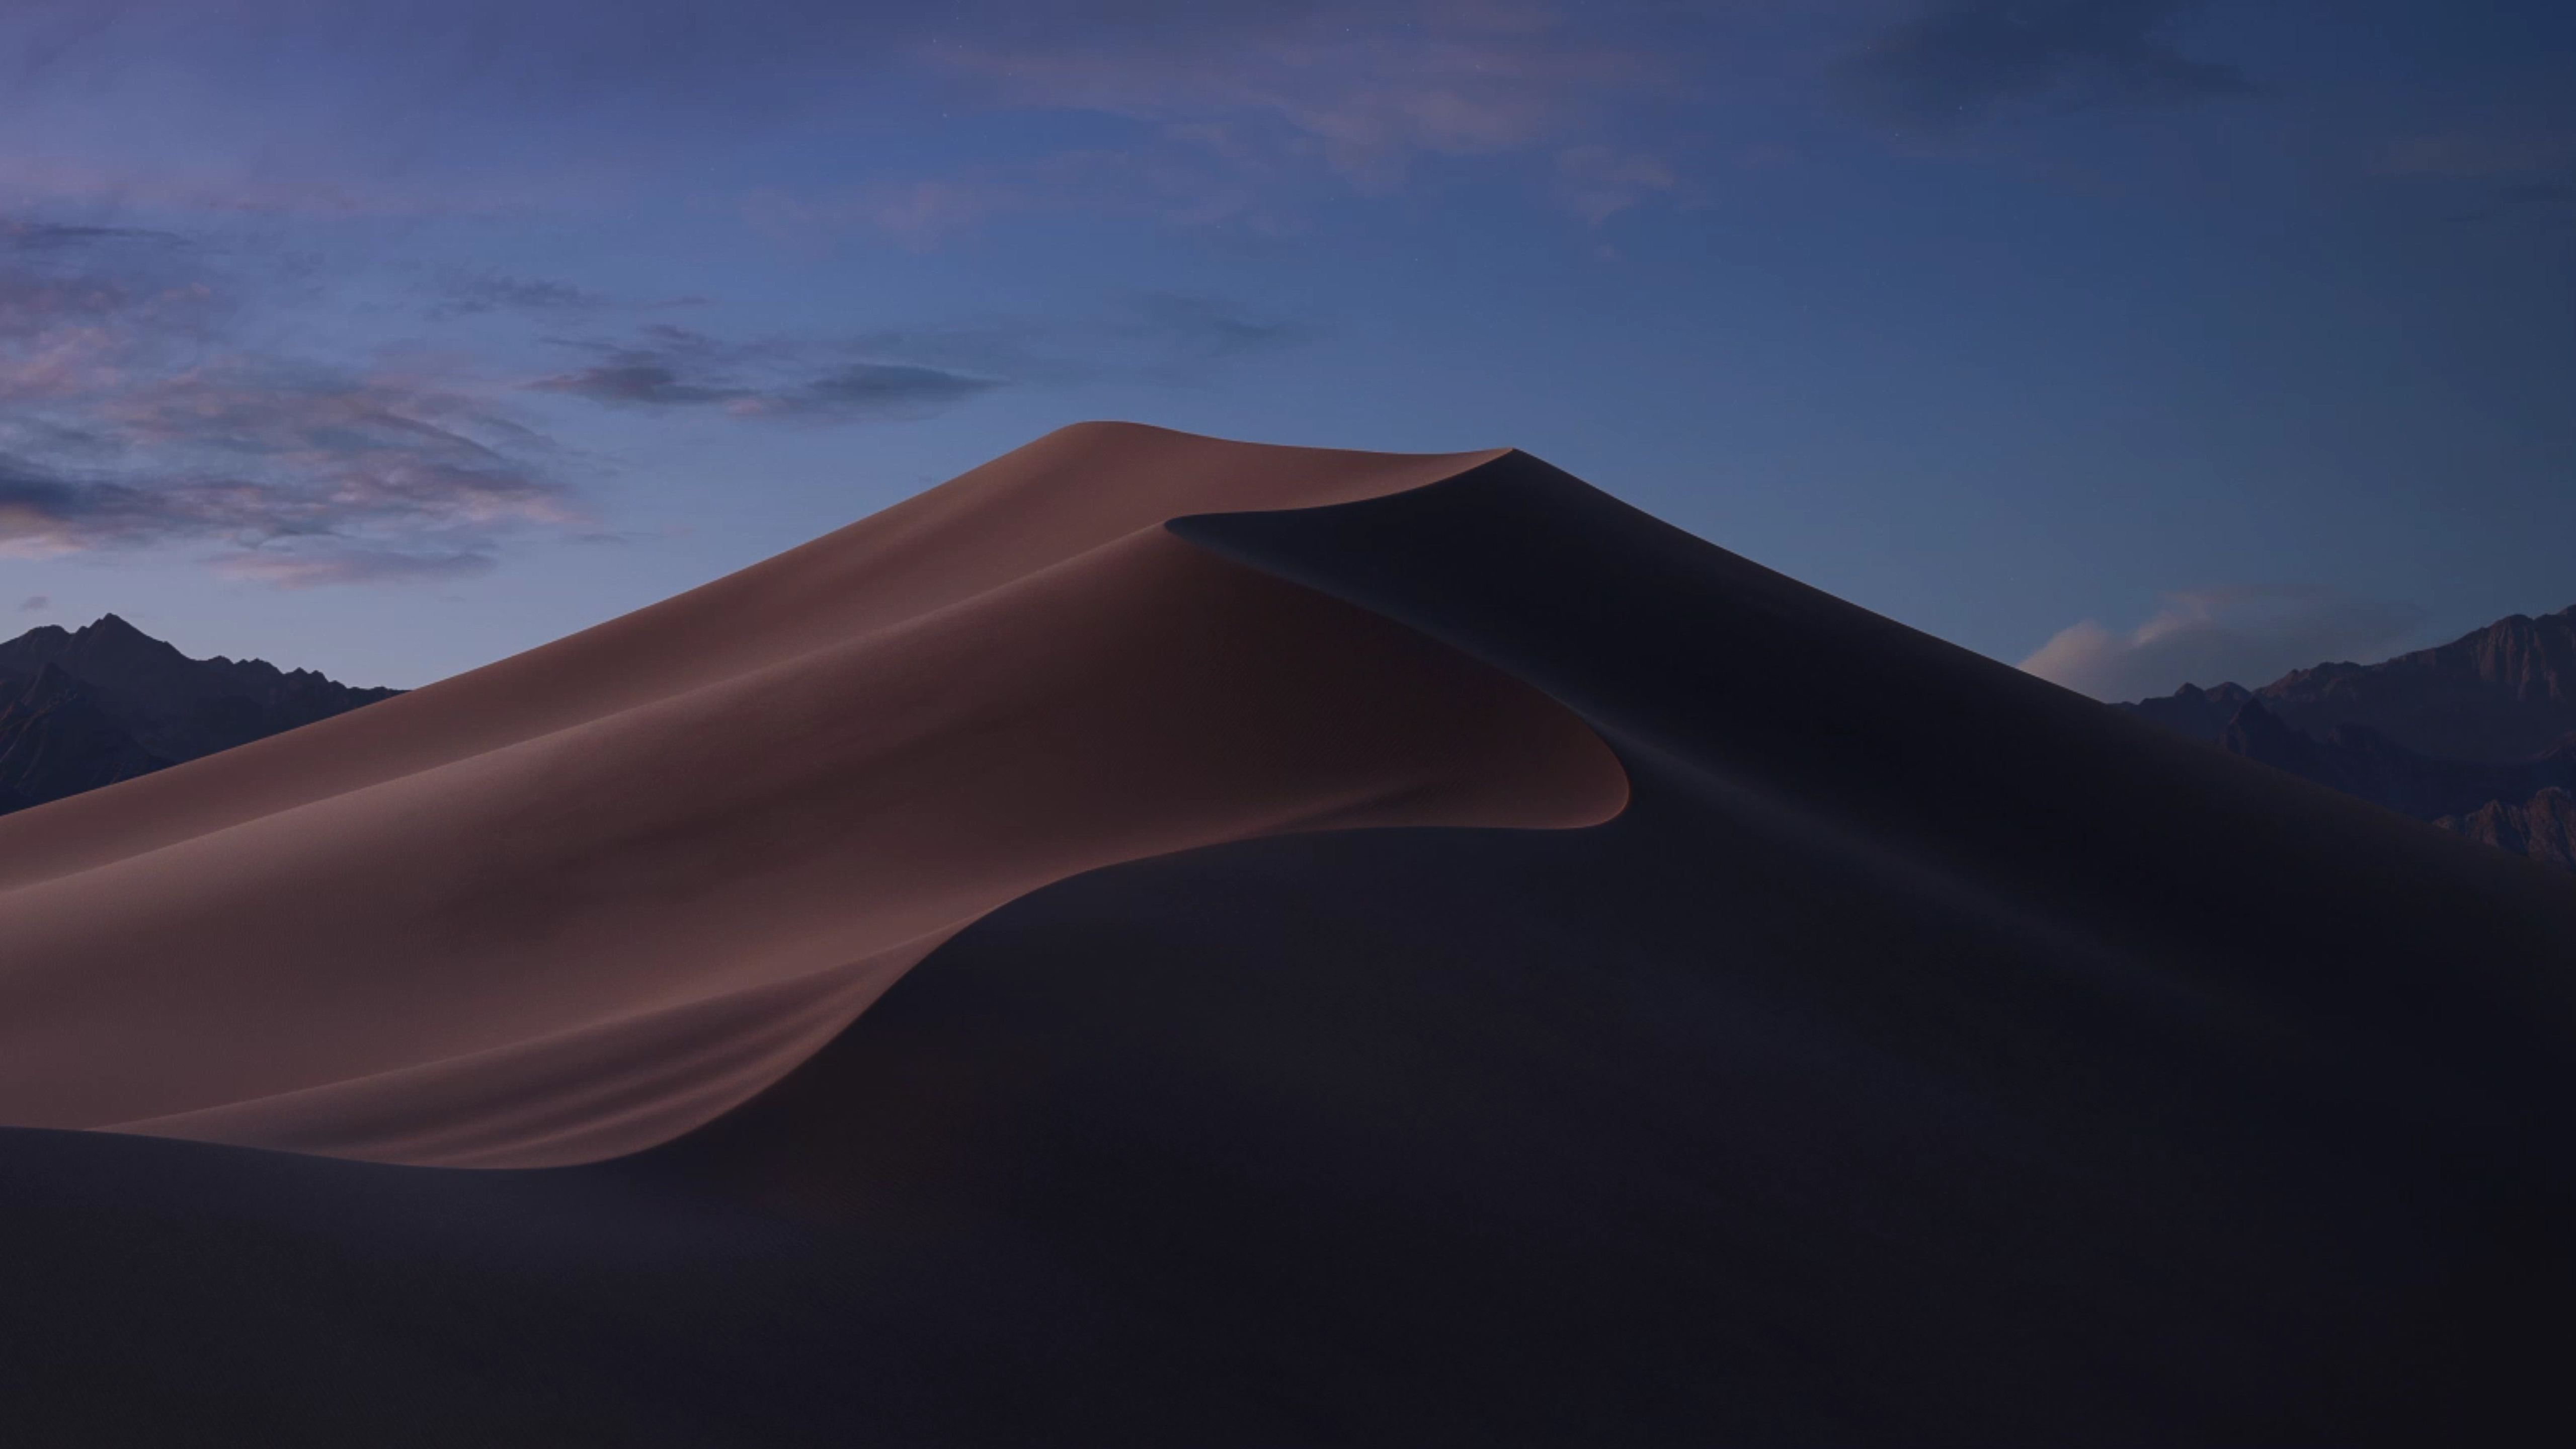 Wallpapers landscapes dunes macos mojave on the desktop